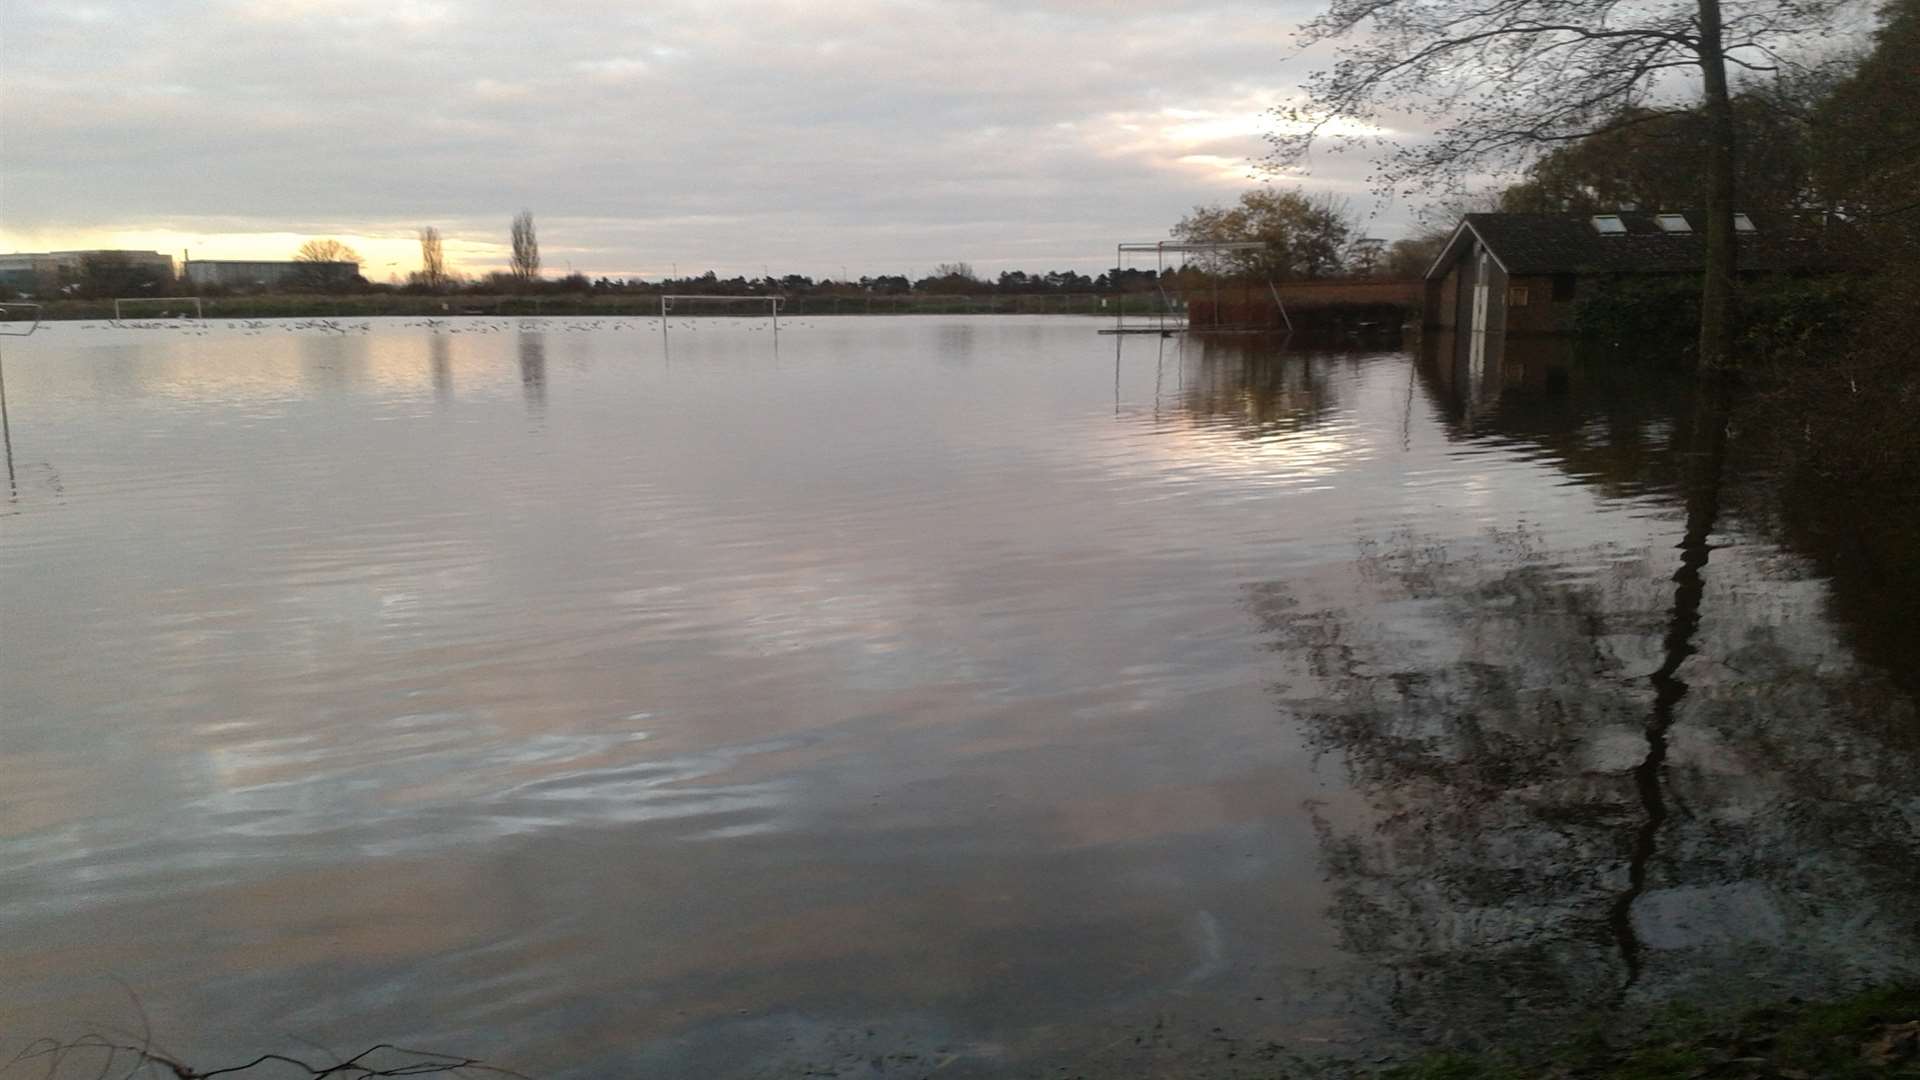 Gazen Salts Nature Reserve is still unopen following December 2013's tidal surge and could open sooner if it gets funding